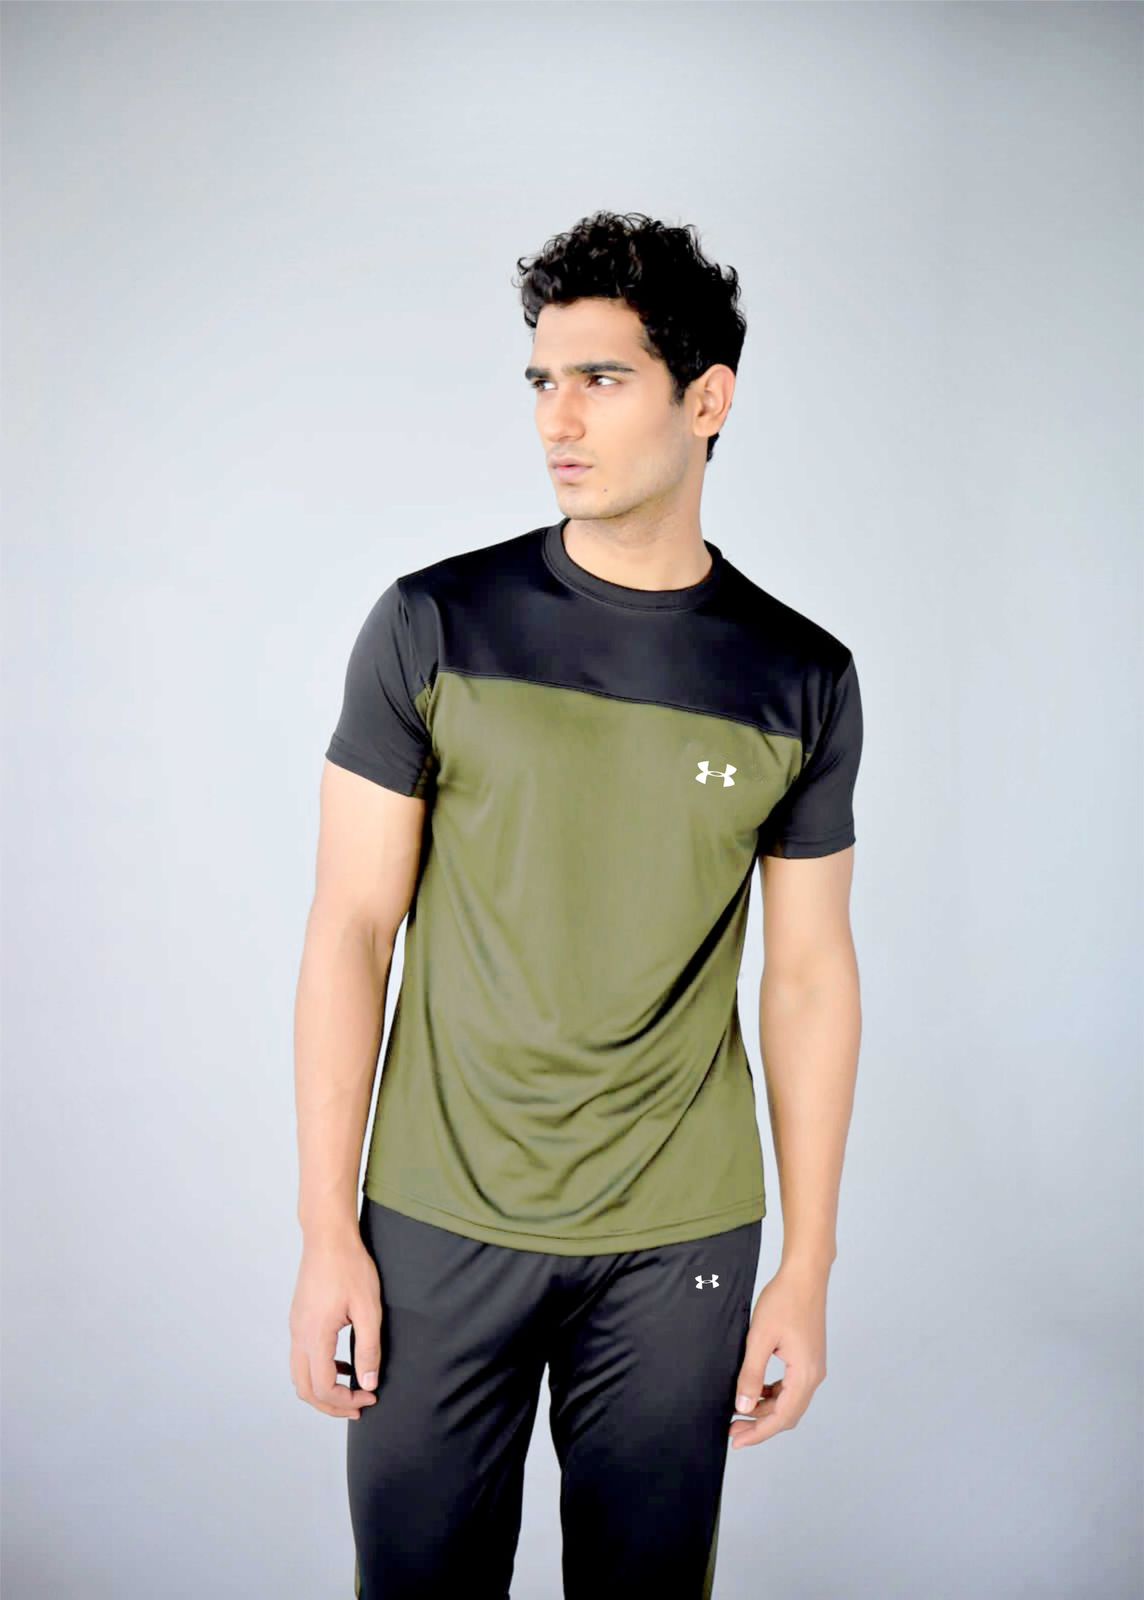 UA Olive Green and Black Summer Dri Fit Track Suit